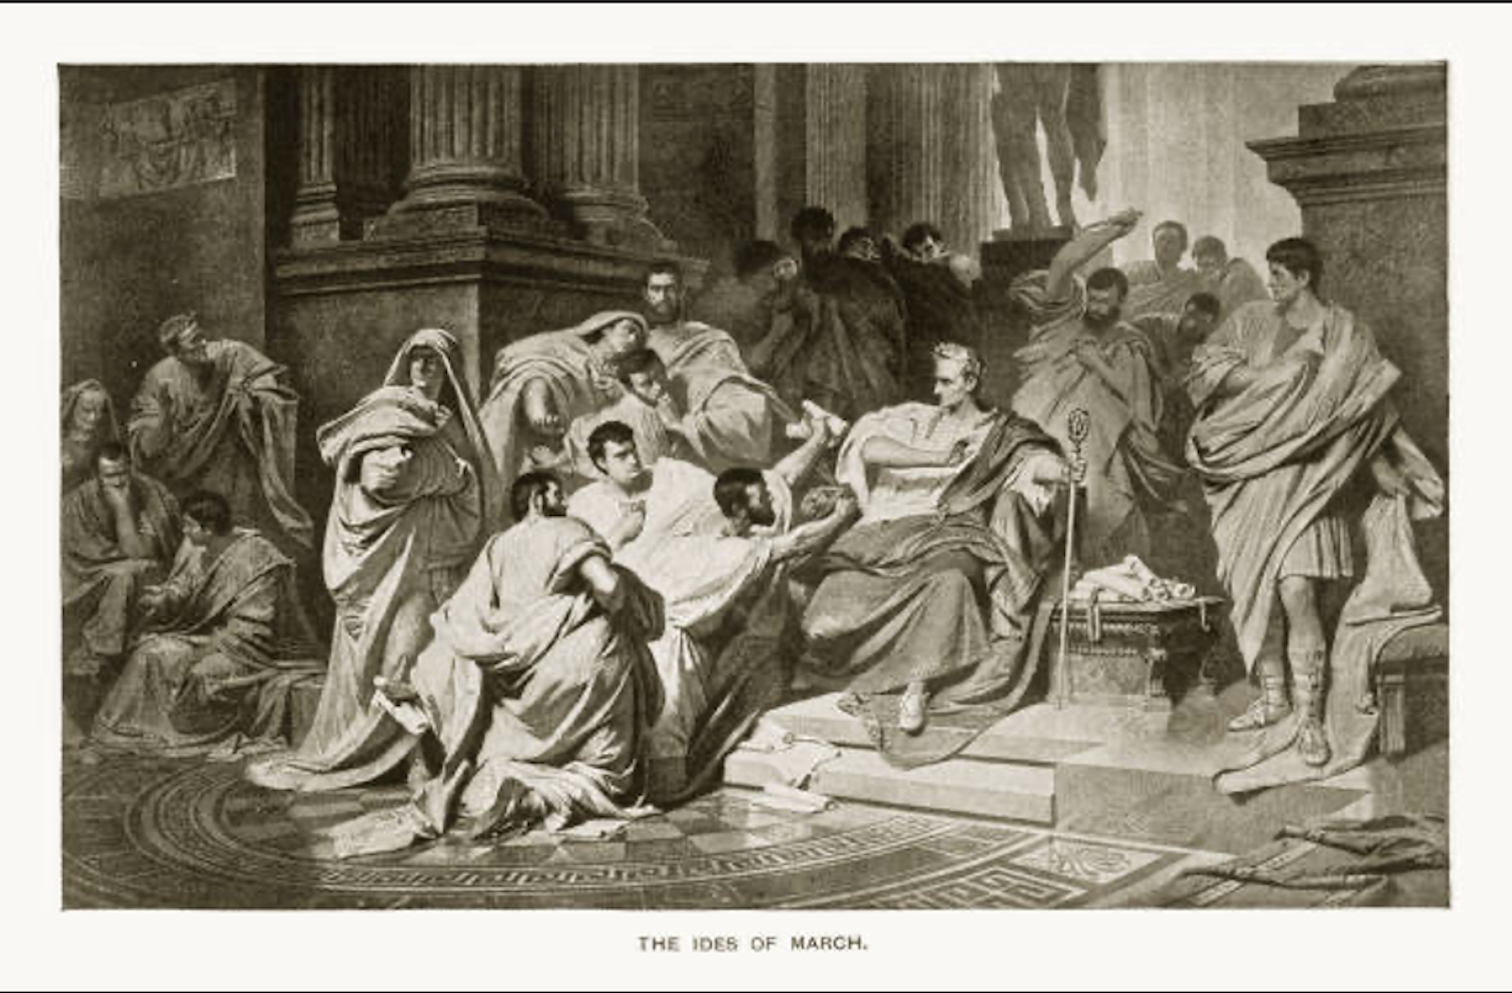 Print Depicting the Ides of March